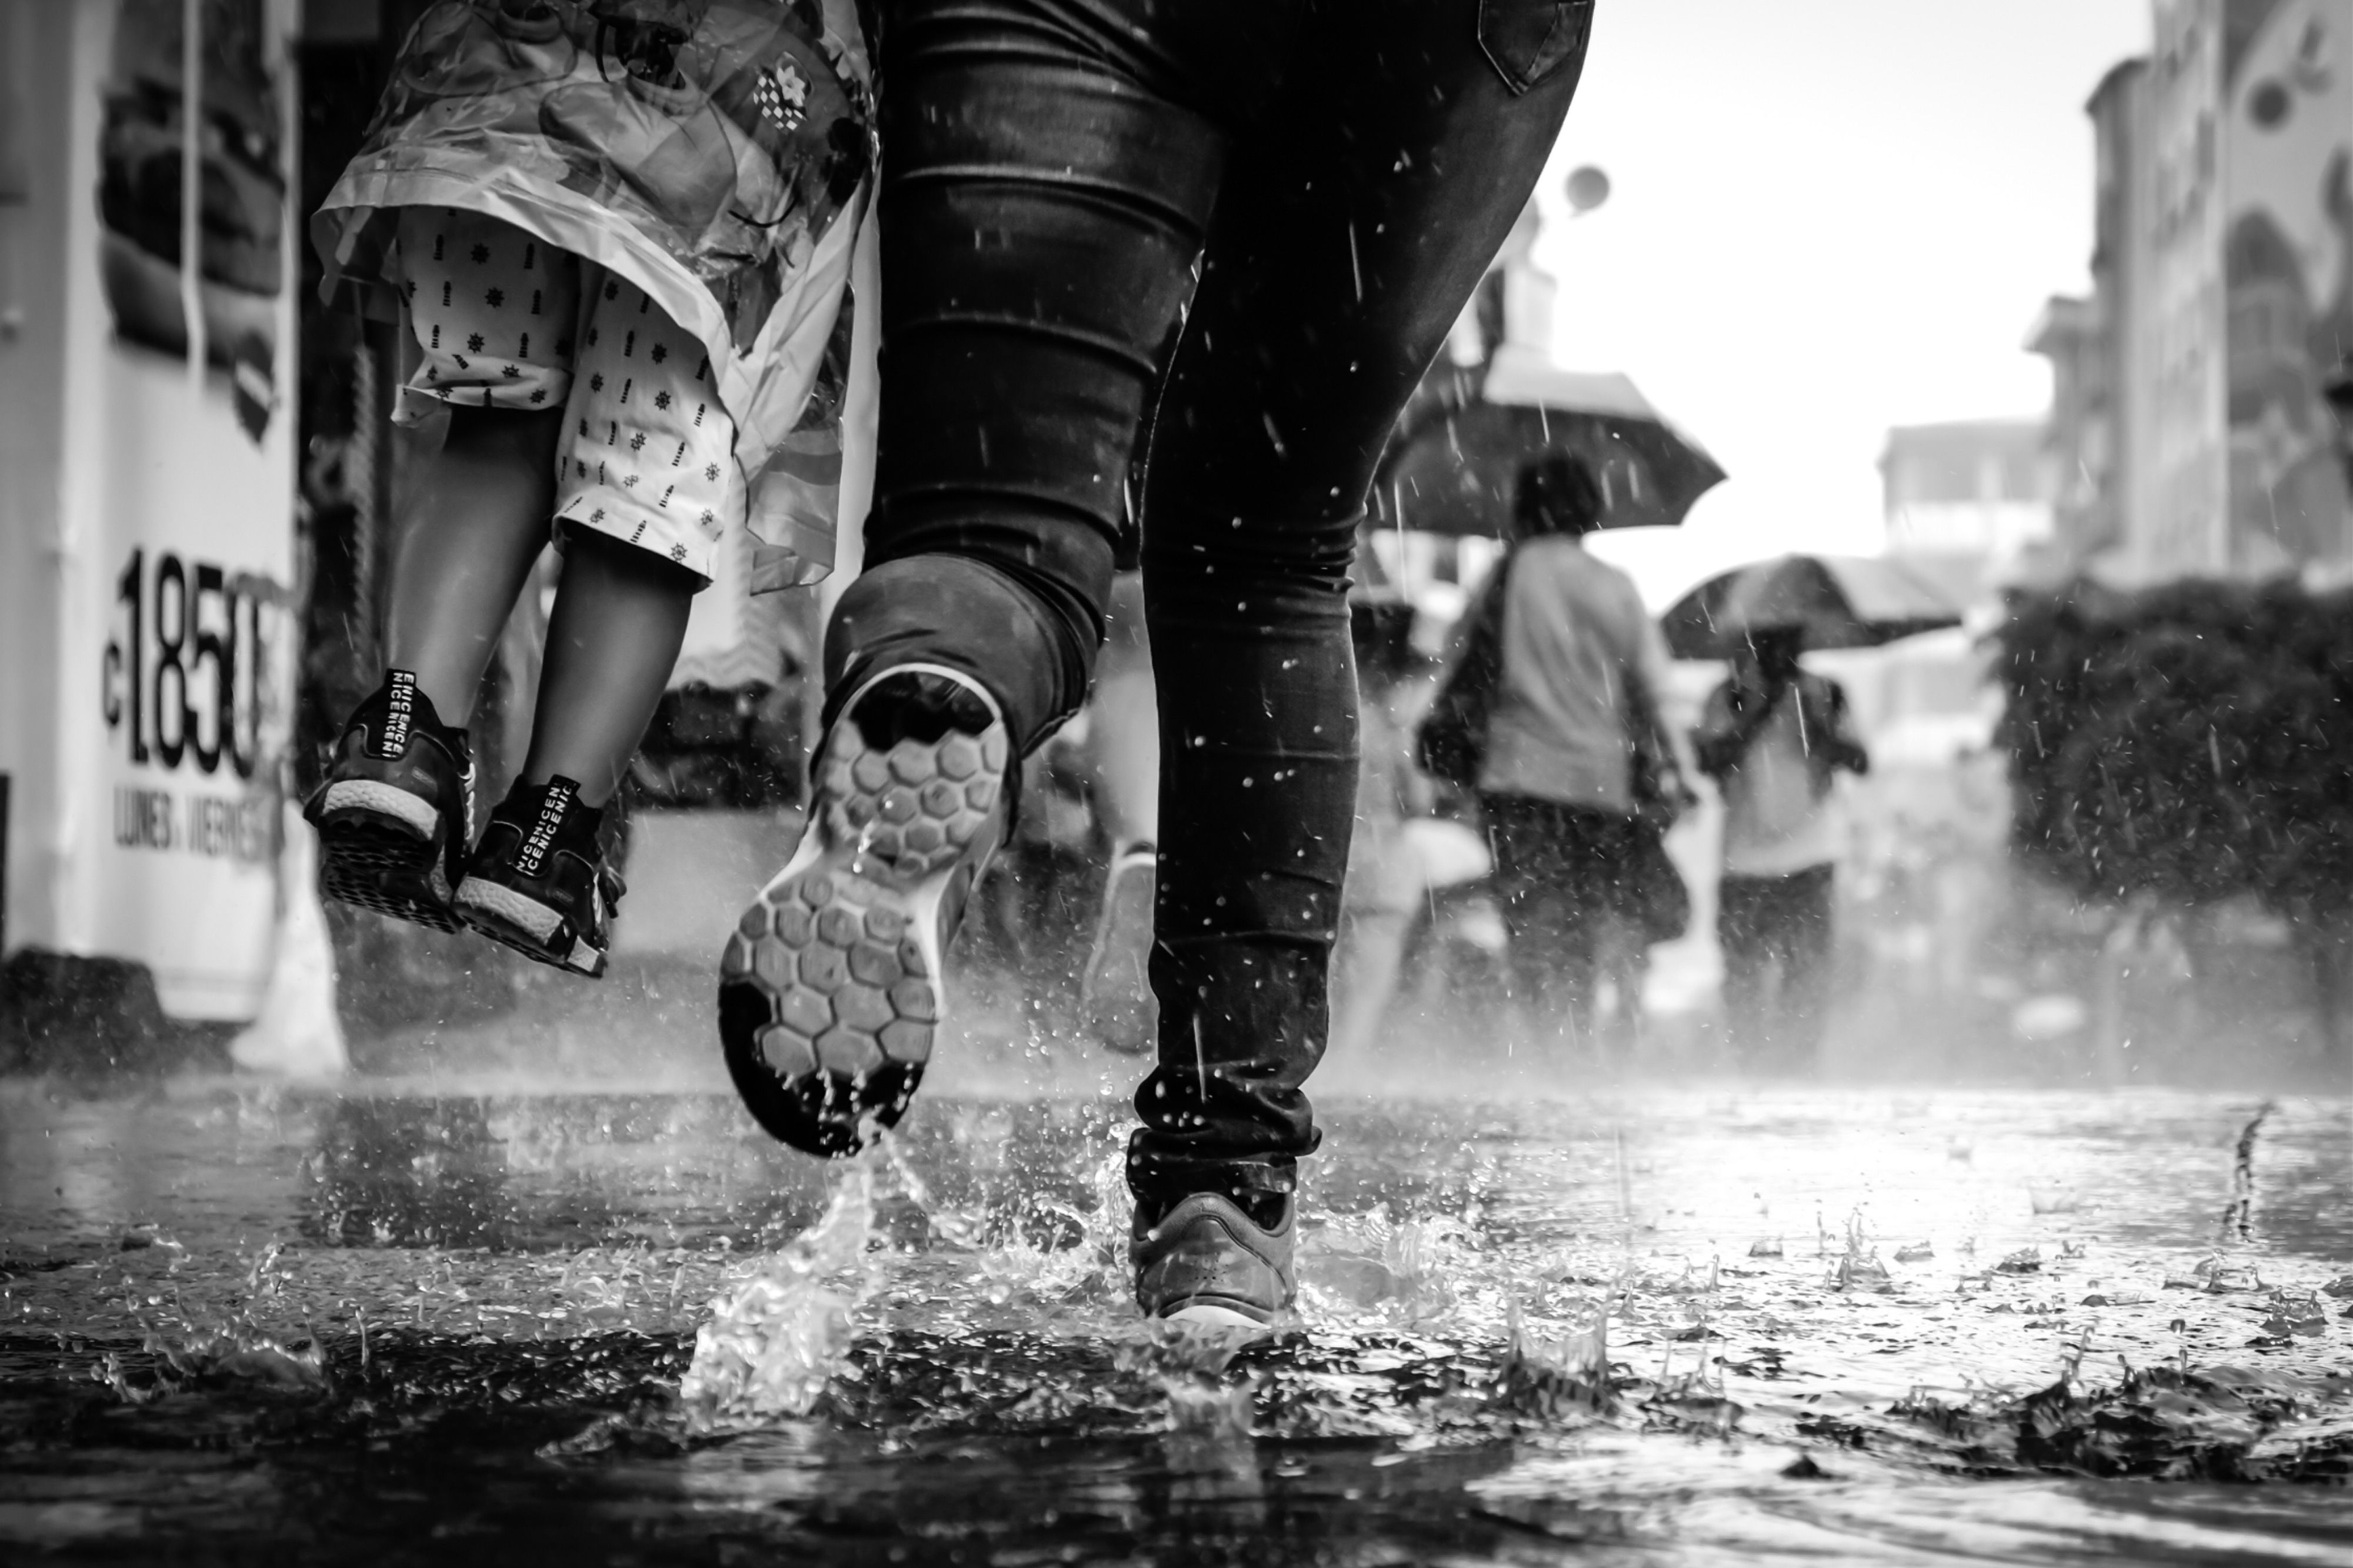 black and white photo of child's legs being carried as adult runs along rainy street